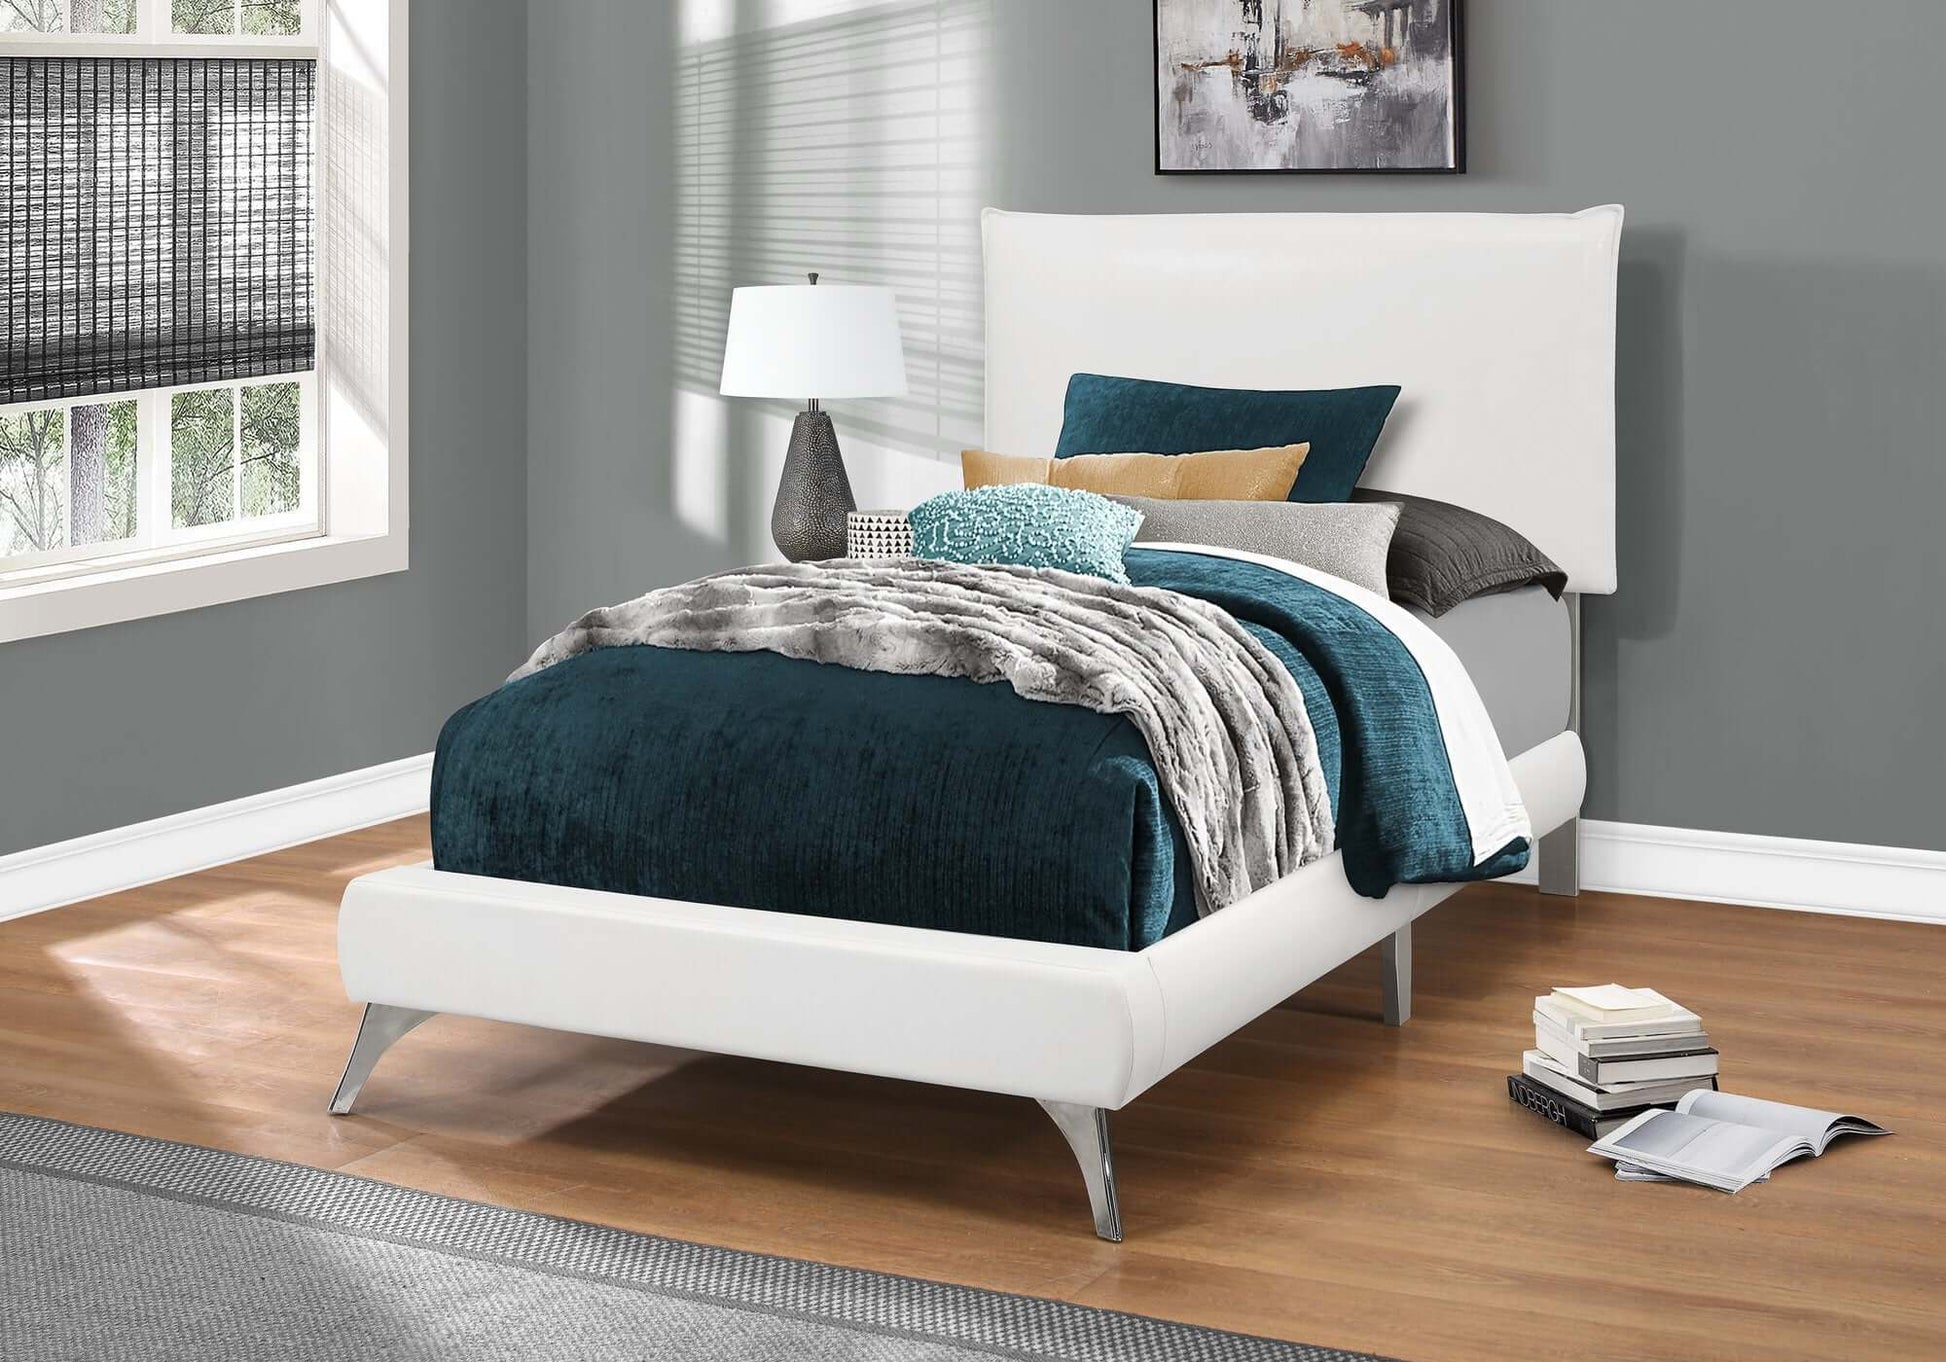 Monarch Specialties - Modern Upholstered Queen Size Bed in White Leather-look with Chrome Legs - I 5953T